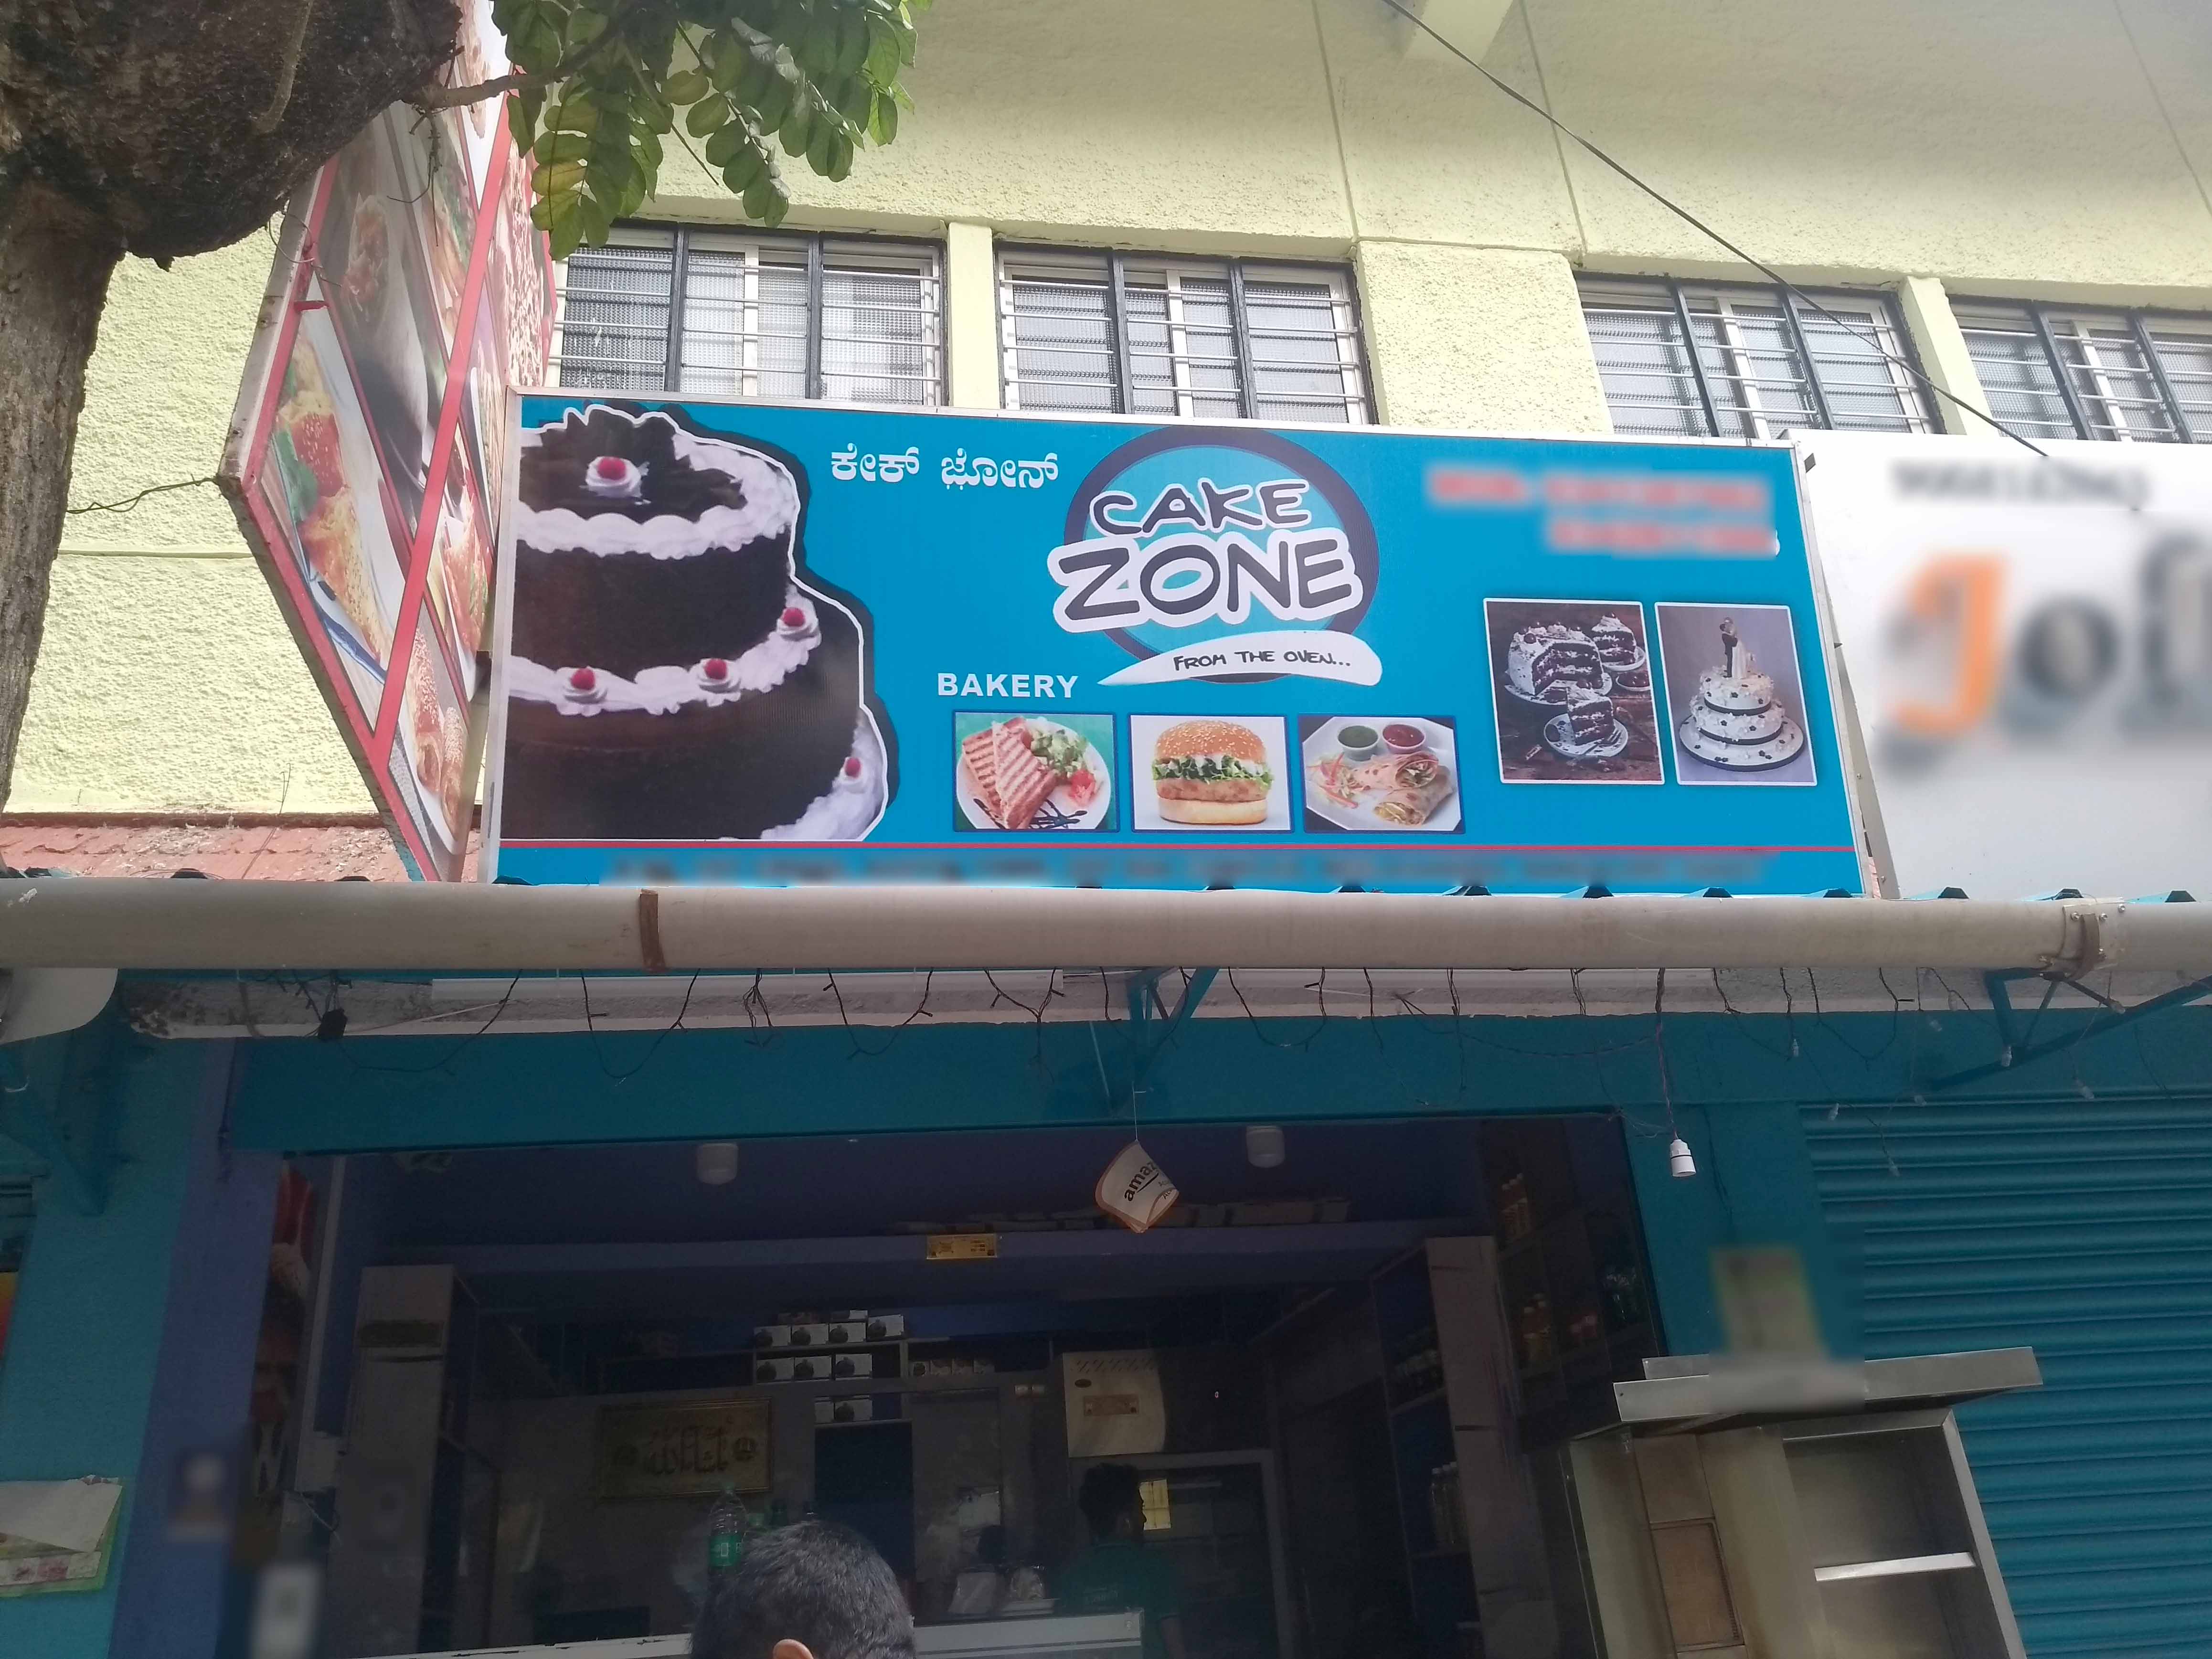 Reviews of Cake Zone, Indiranagar, Bangalore | Dineout discovery